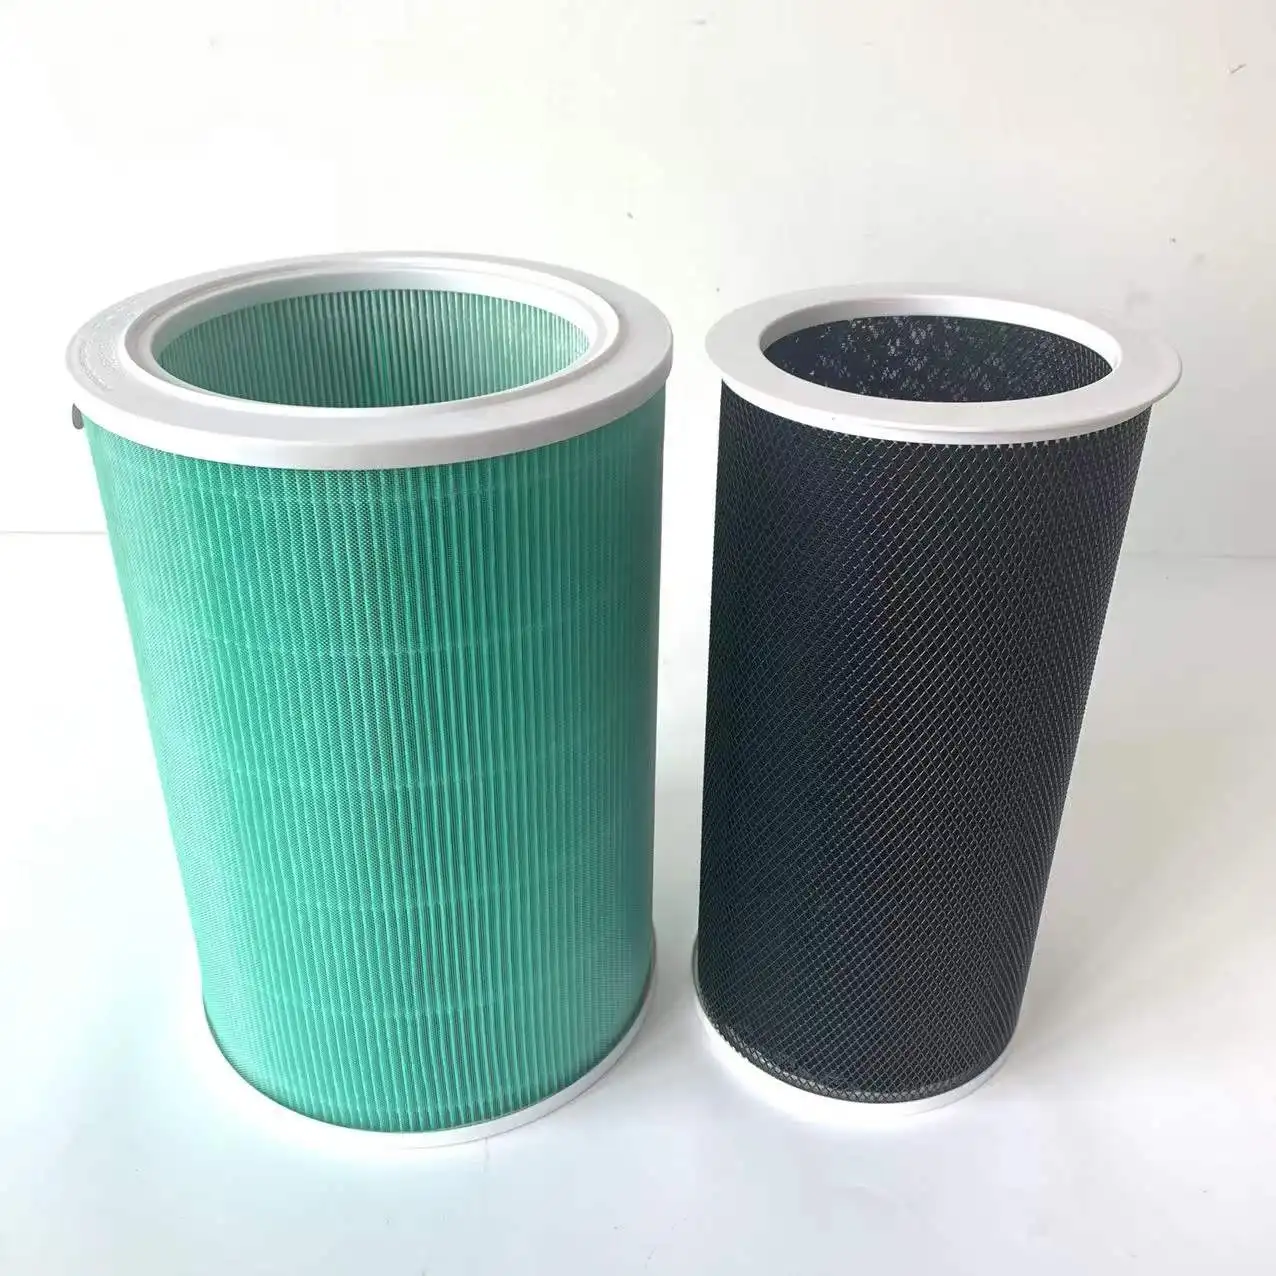 2022 Refine factory xiaomi Air purifier HE PA filter  with activated carbon filter